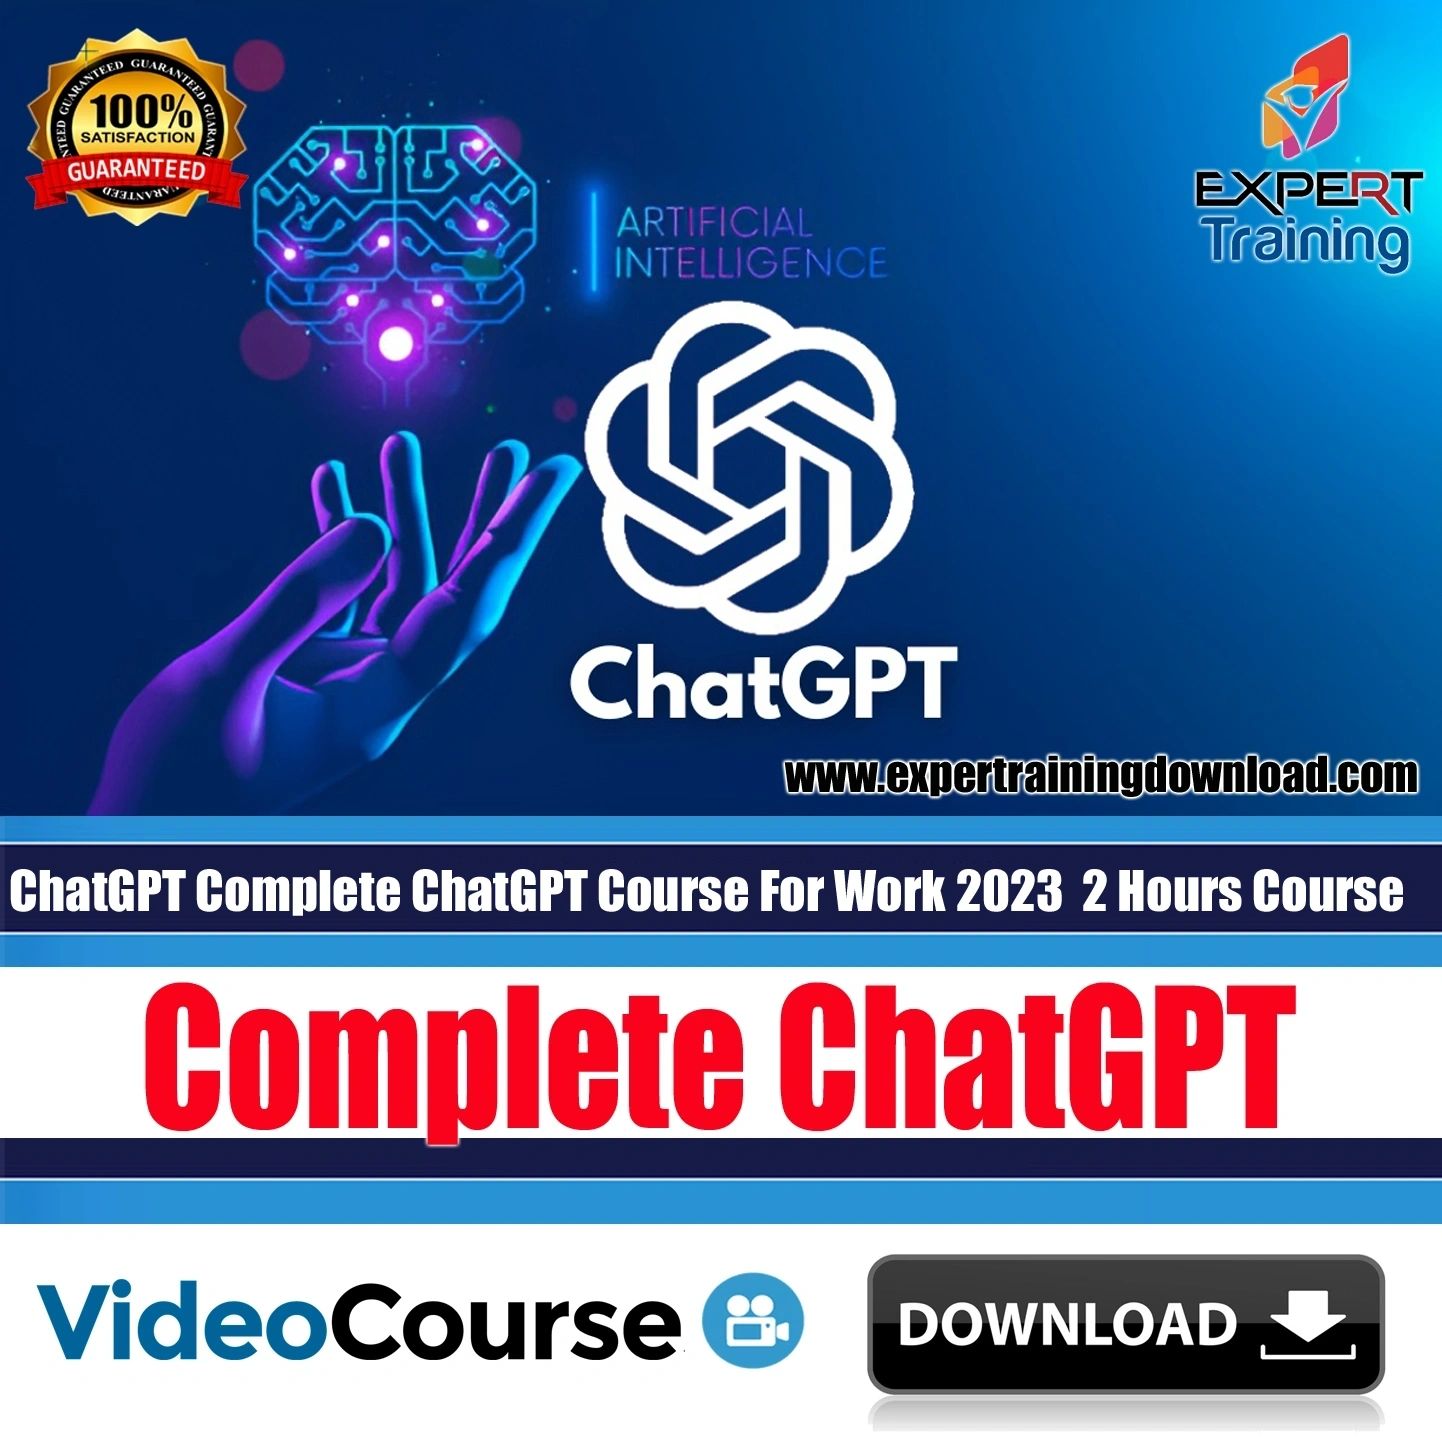 ChatGPT Complete ChatGPT Course For Work 2023 Course